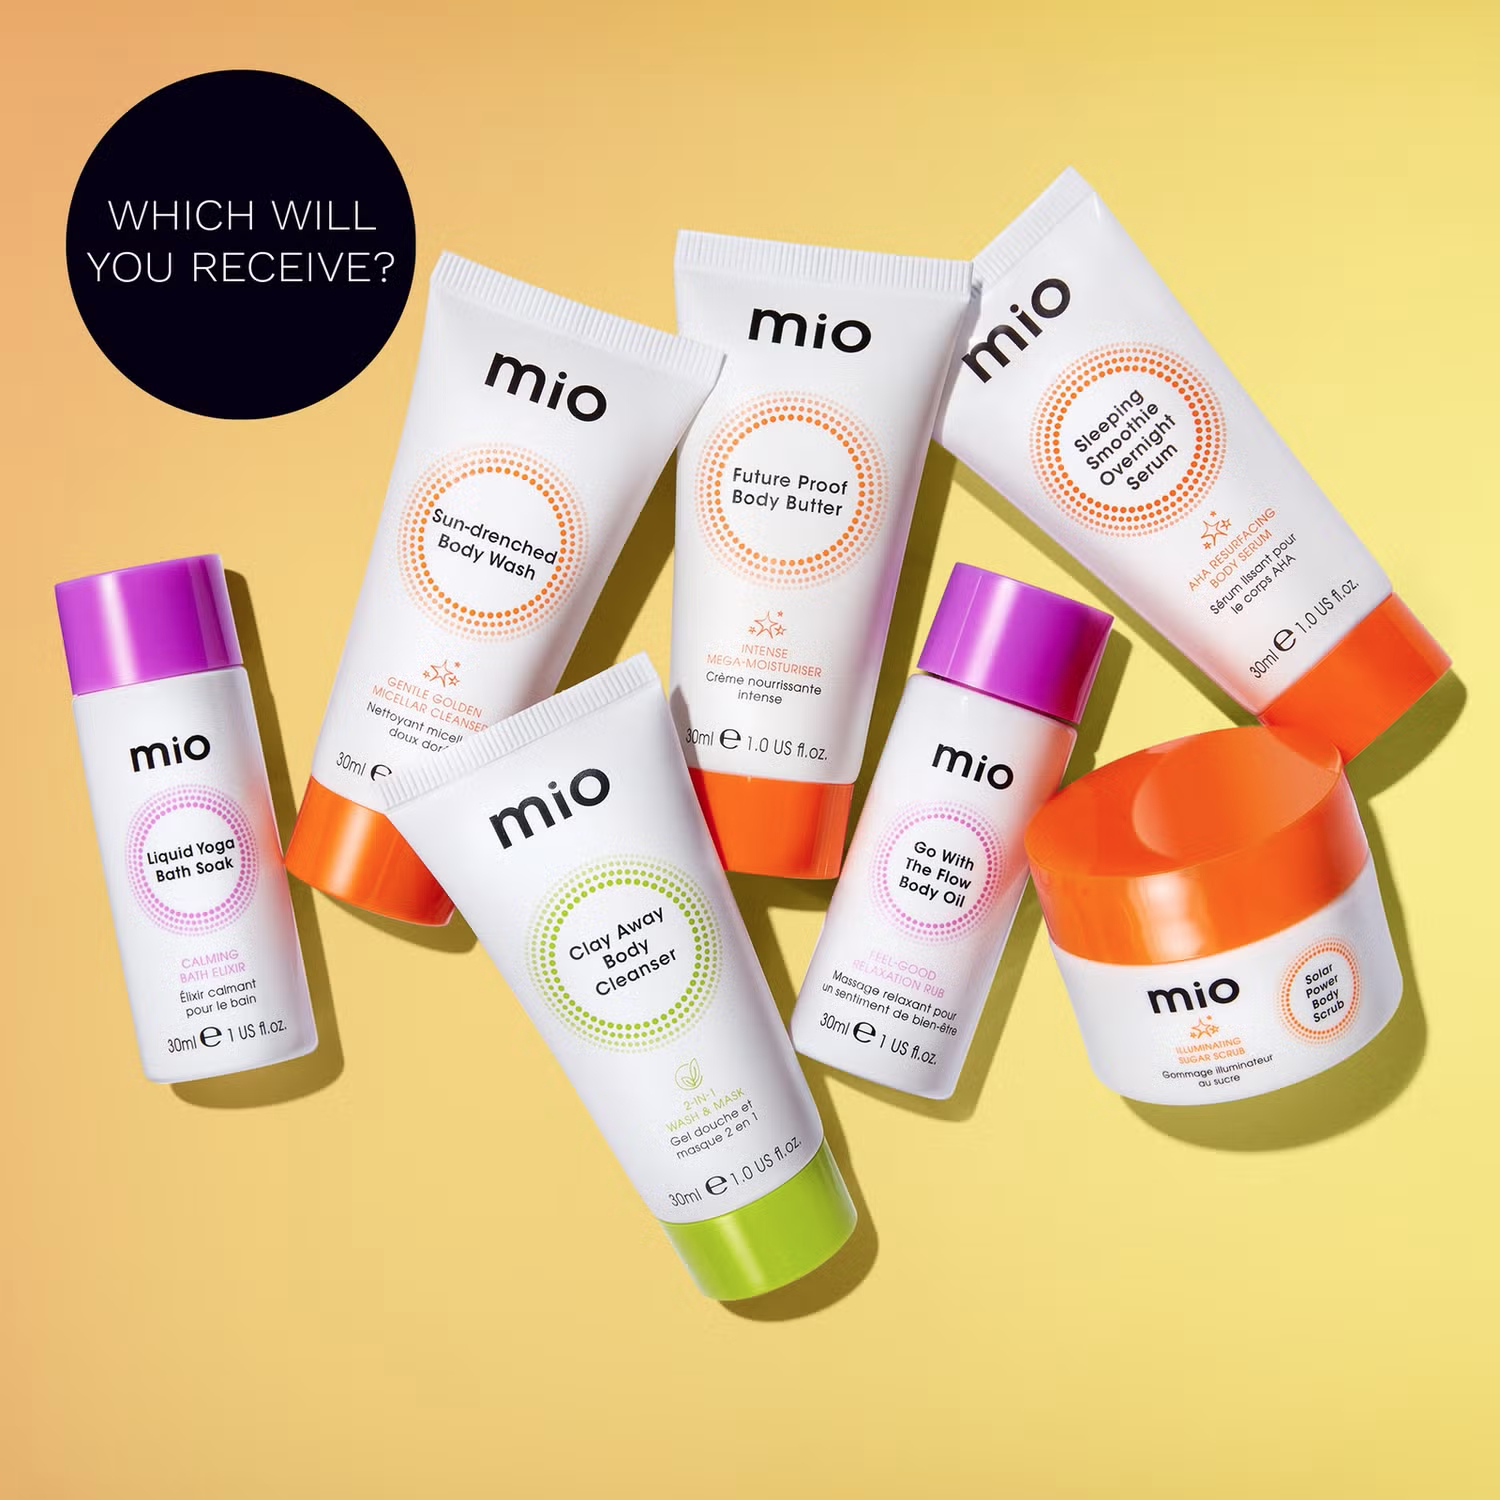 Mystery Must-Have you’ll also receive 1 of the following Mio minis